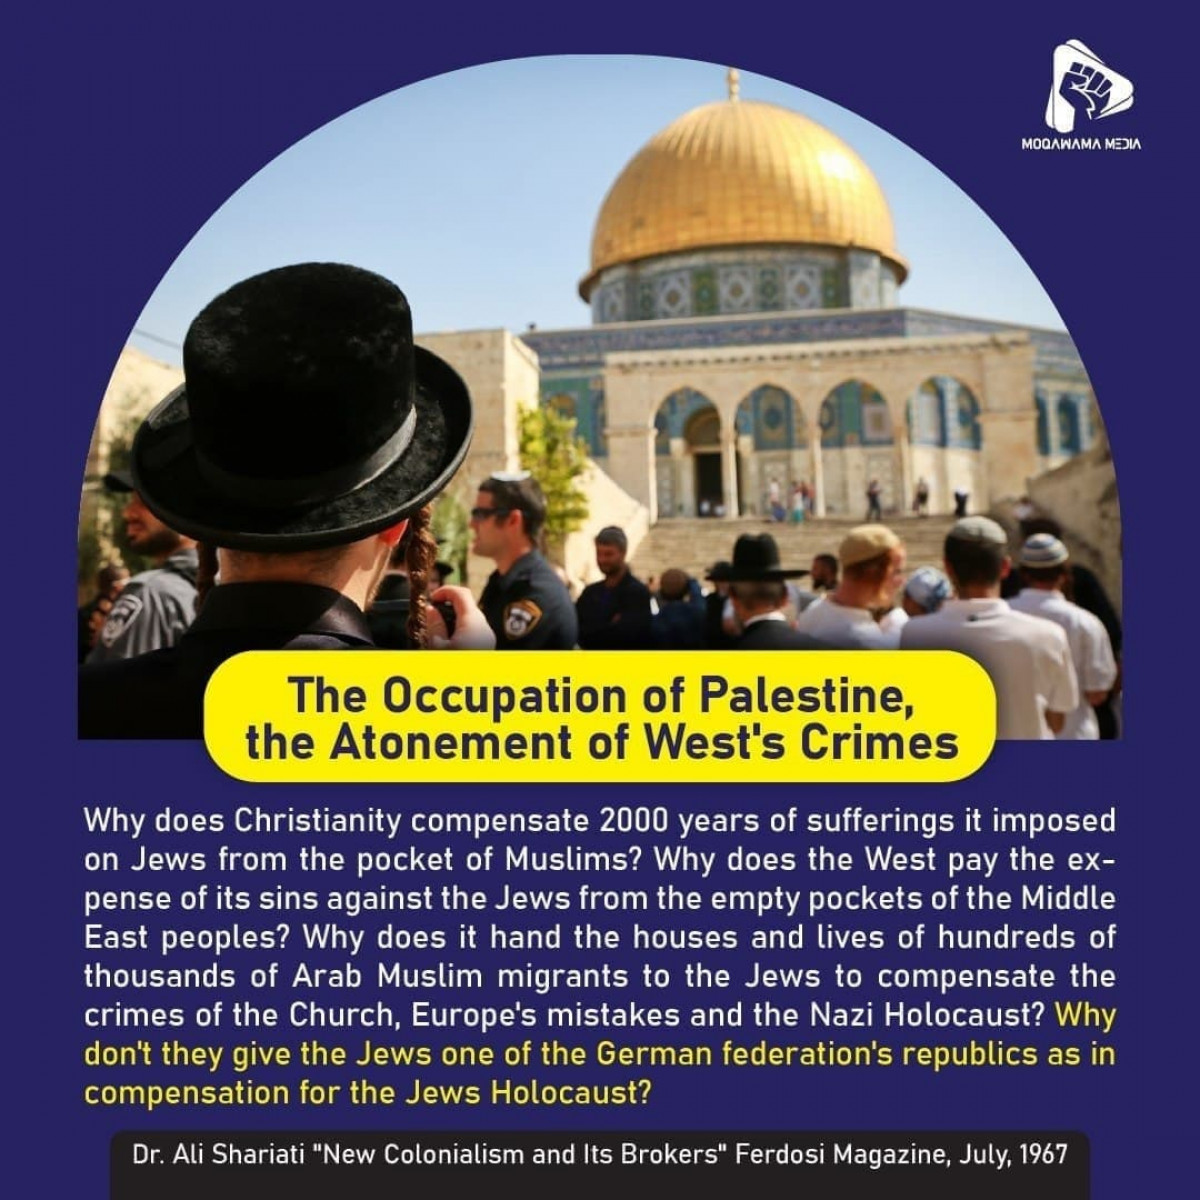 The Occupation of Palestine, the Atonement of West's Crimes 2